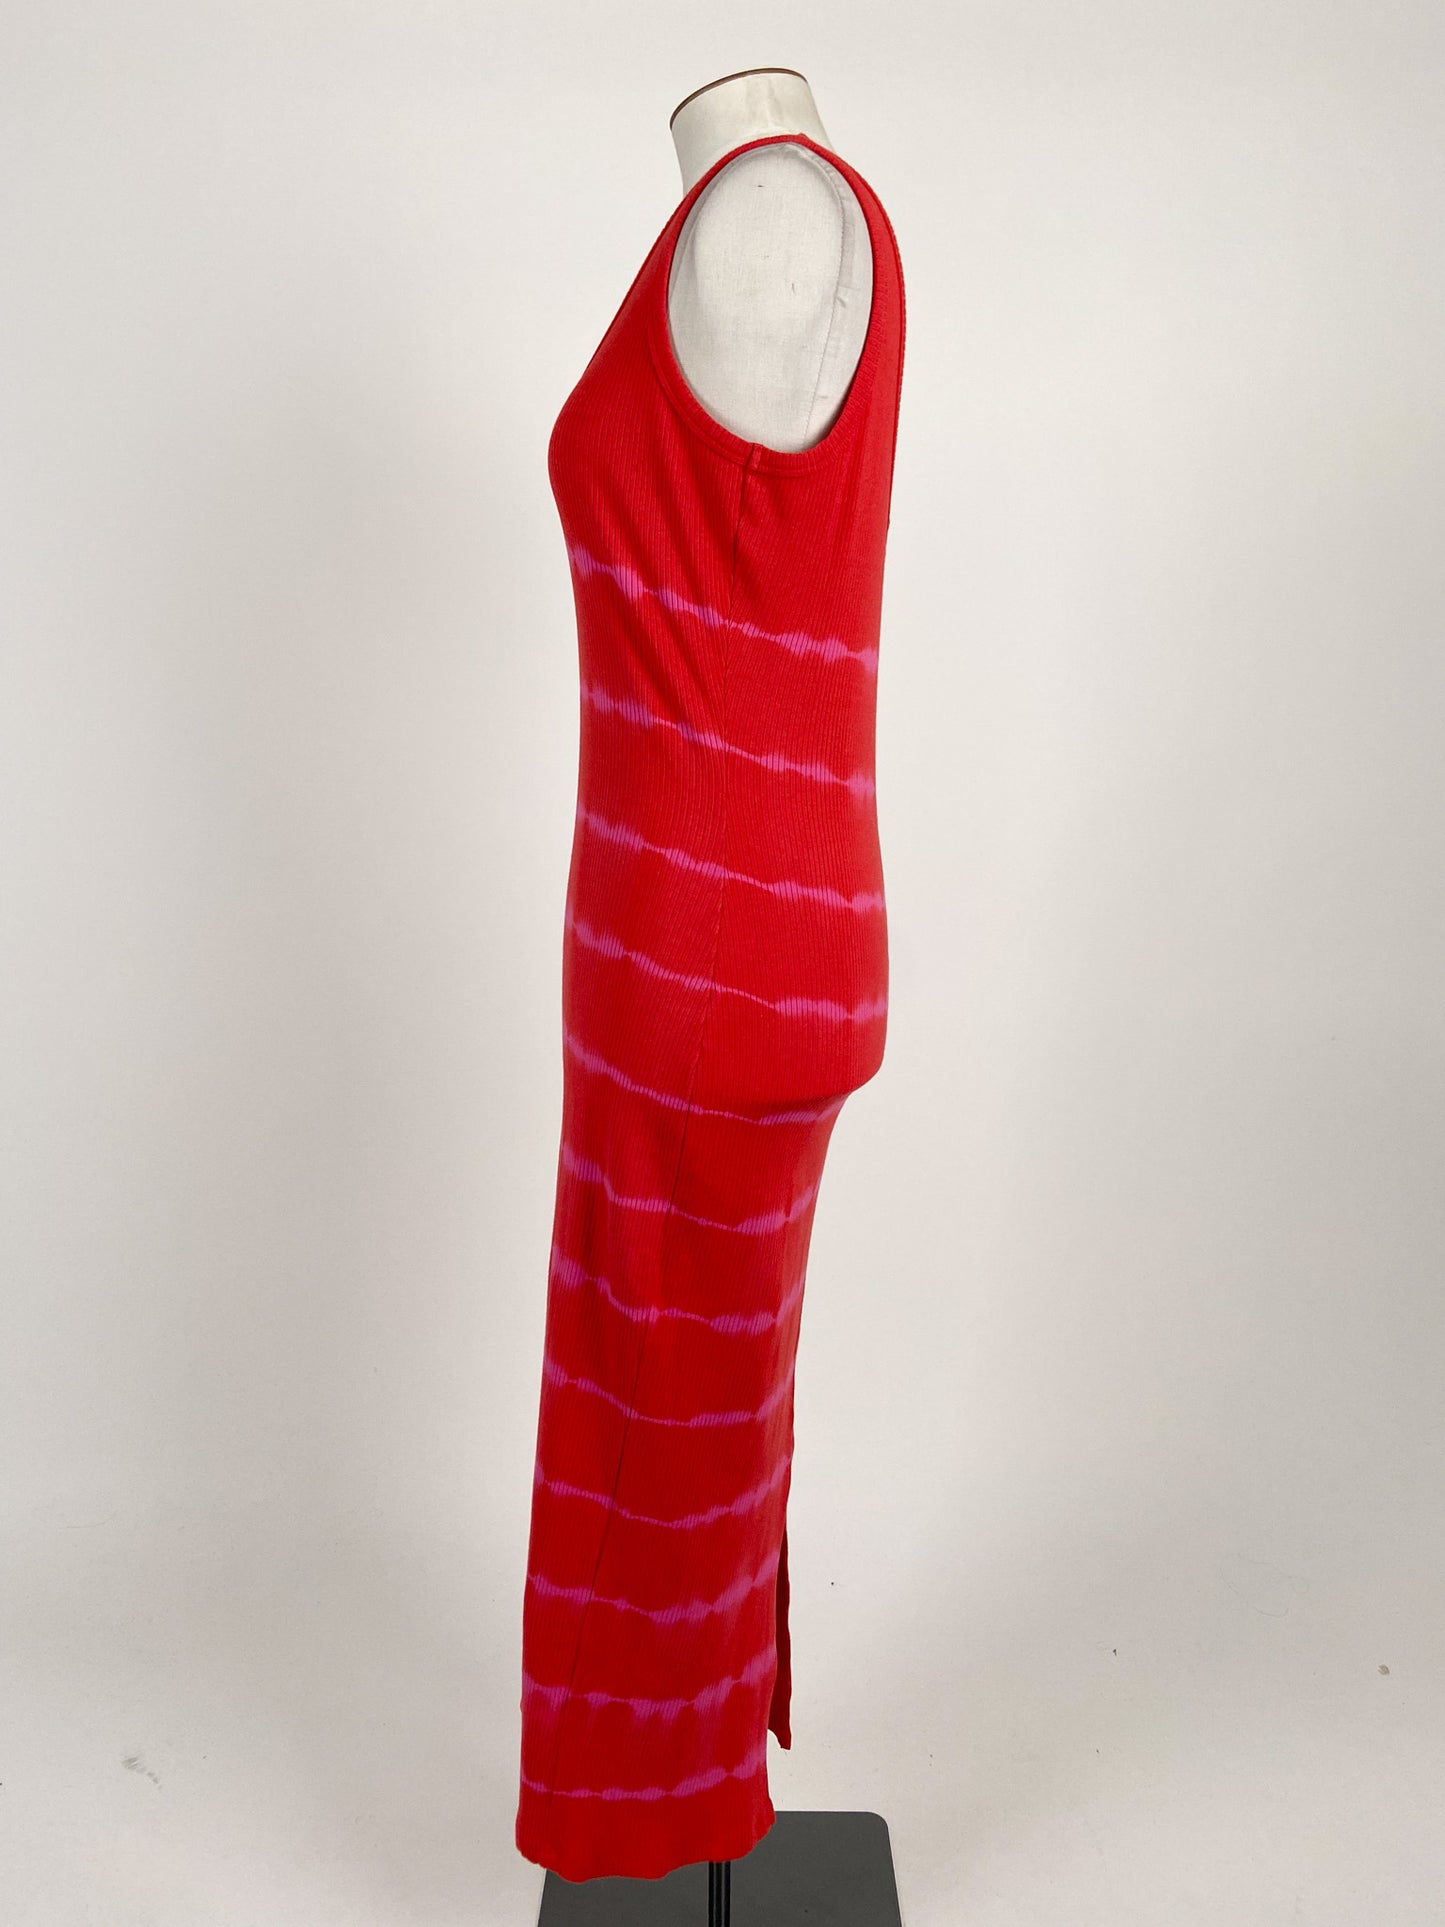 Hush | Red Casual Dress | Size 12